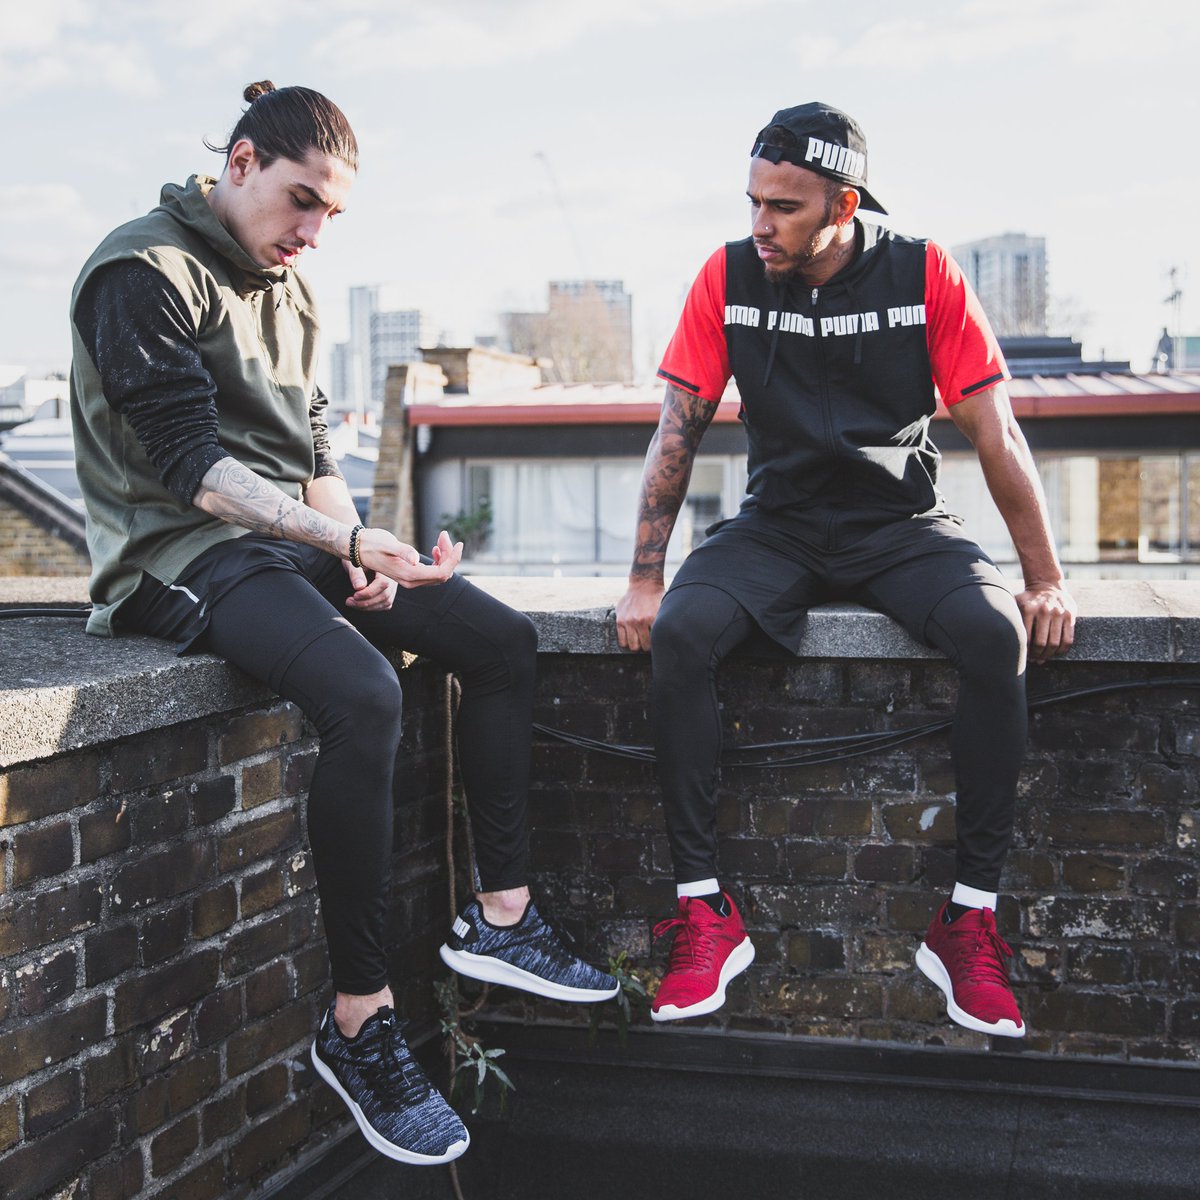 Lewis Hamilton on Twitter: "Awesome training with @HectorBellerin in LDN. @PUMA  IGNITE FLASH ⚡ #PUMAPartner #24Seven https://t.co/Mp4z8g0htm" / Twitter